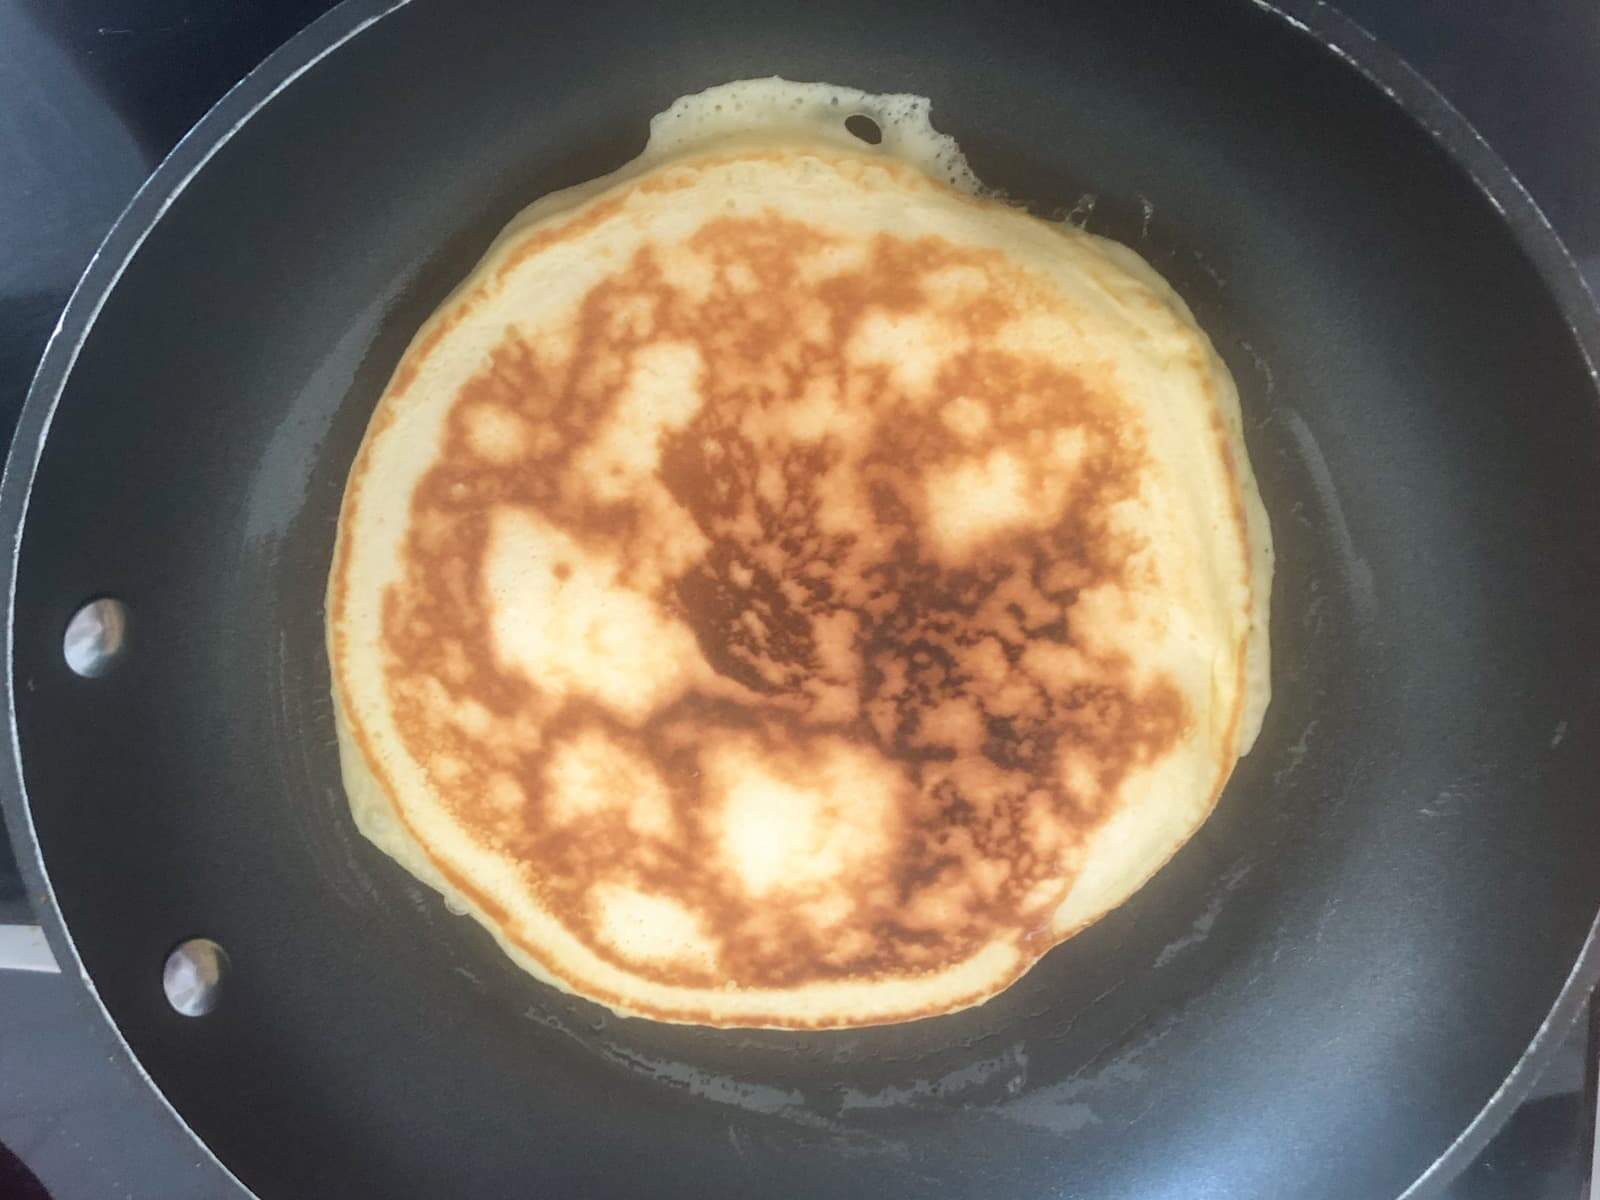 A scotch pancake flipped over showing the caramelisation on the pancake after one side was cooked.